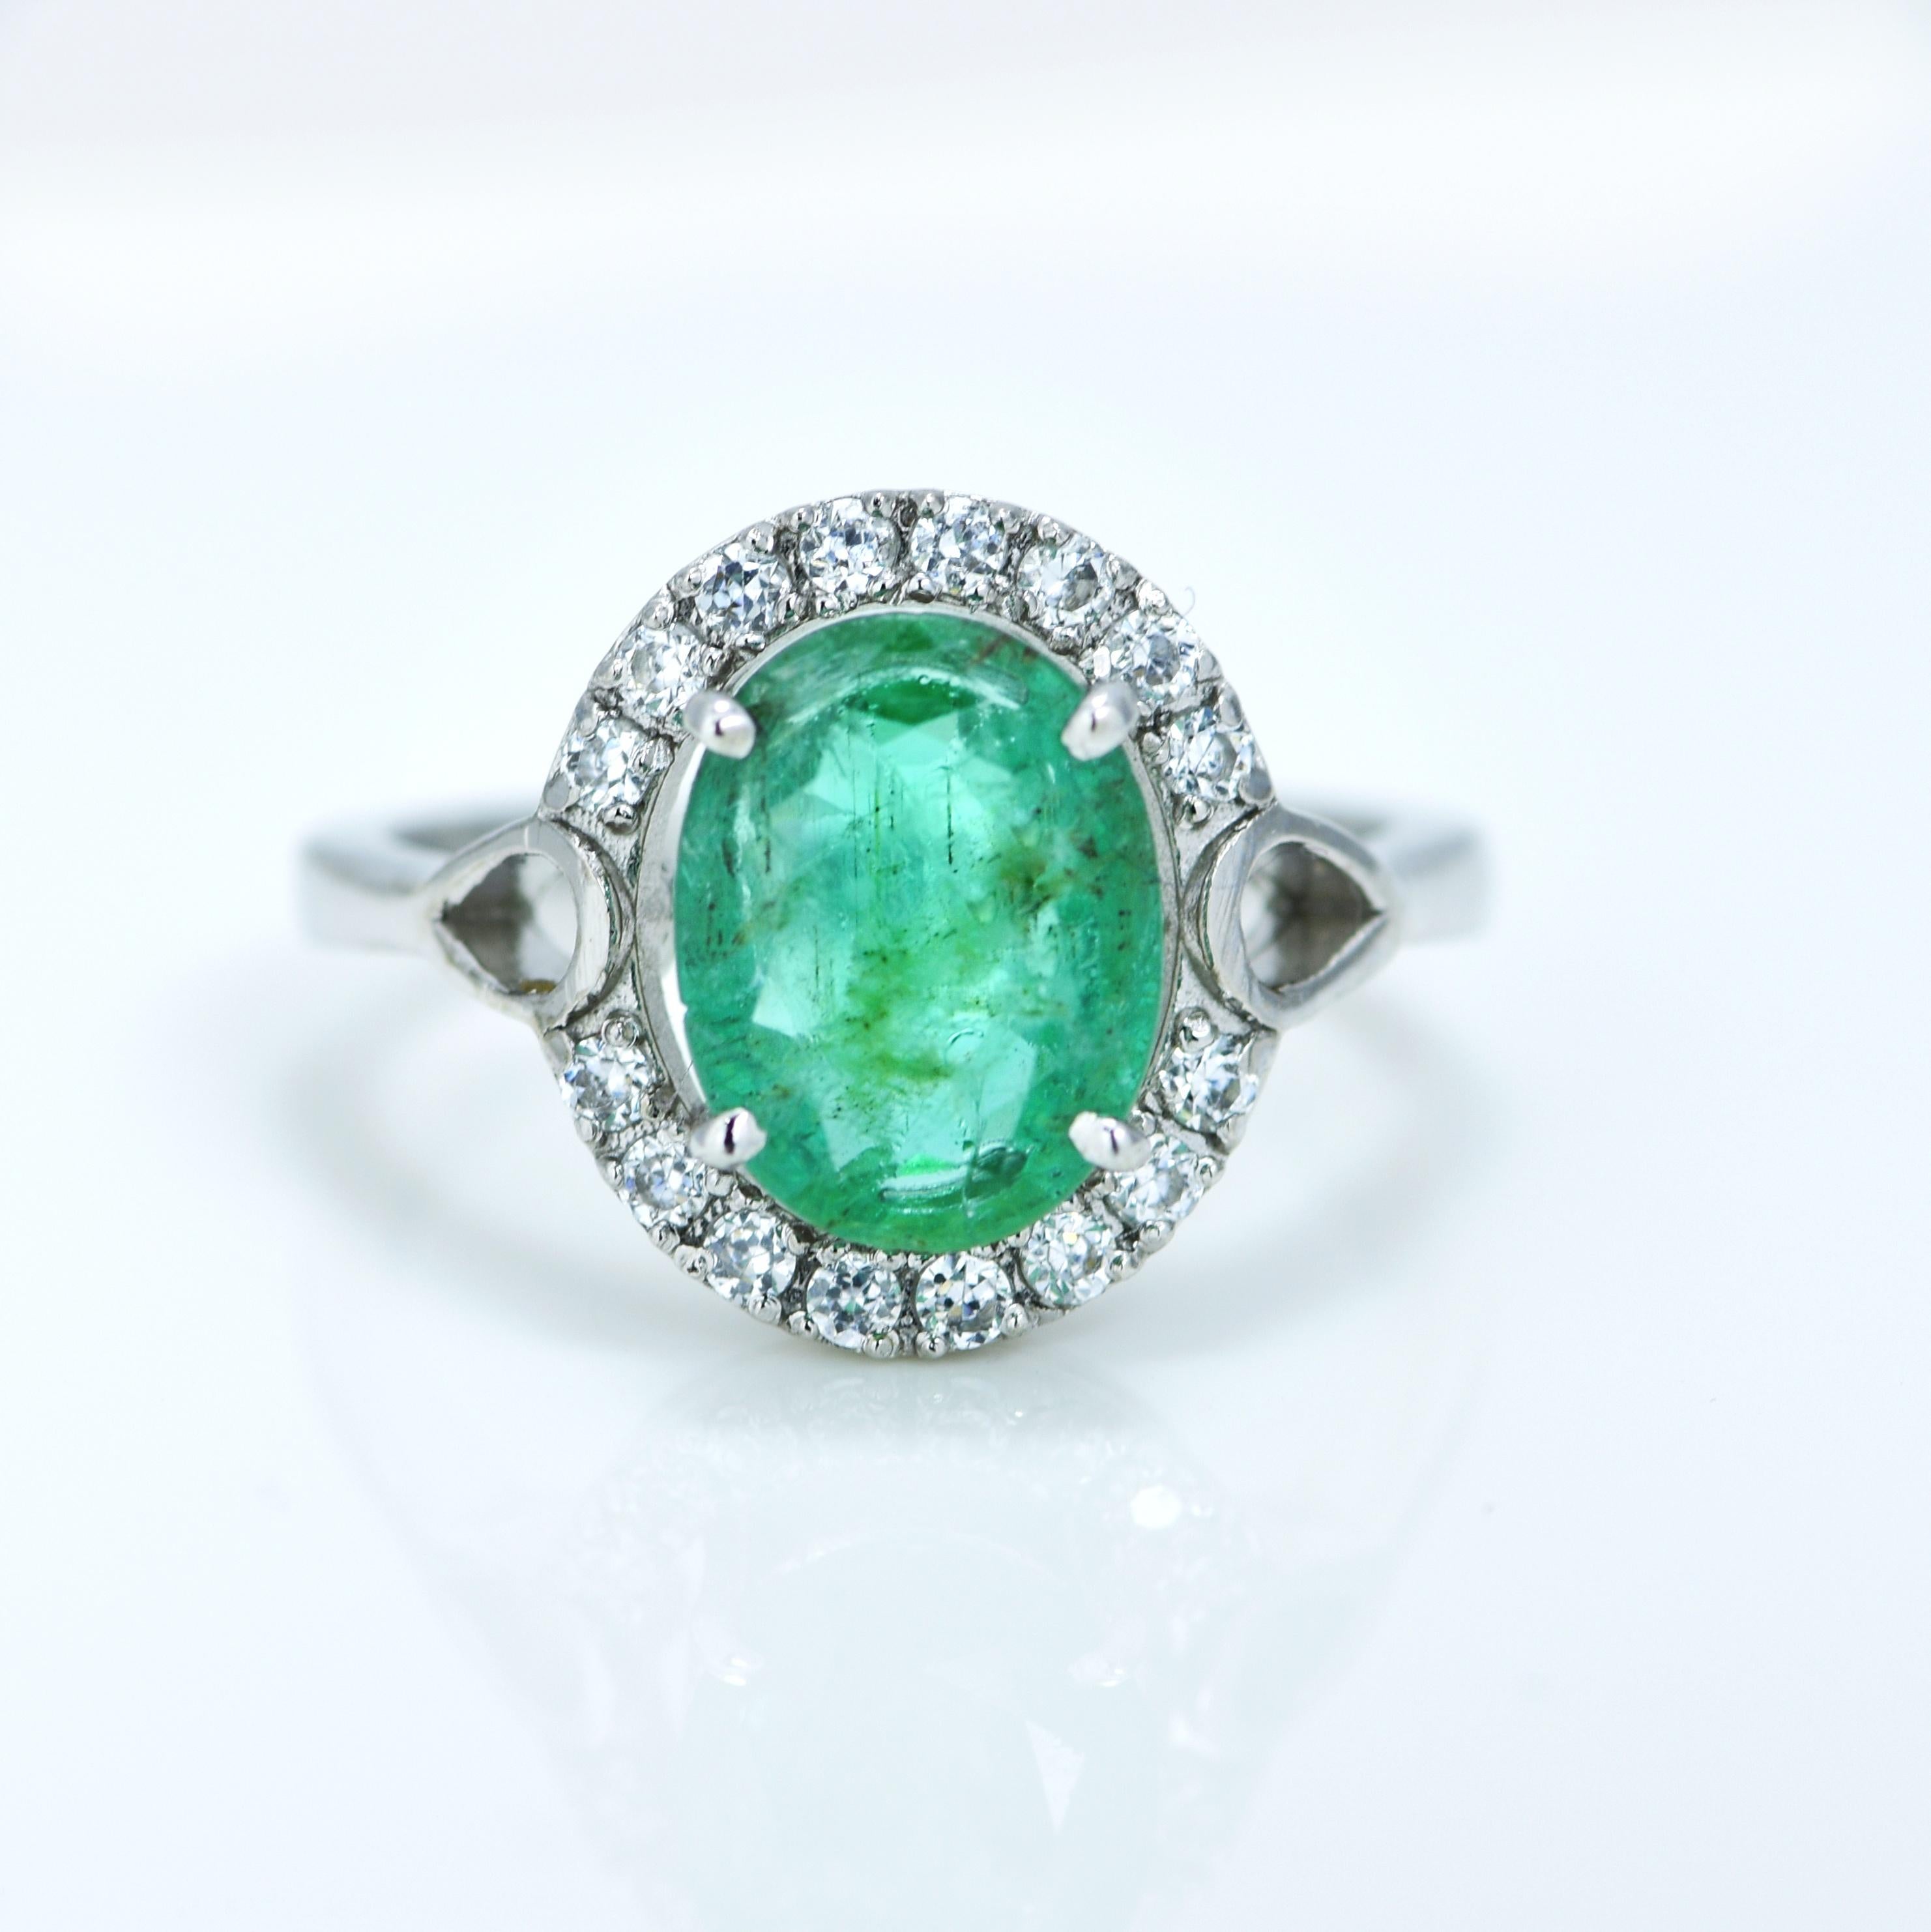 A beautifully designed Natural Emerald silver ring, 

Specifications 

Ring metal - 925 Silver
Ring Size - 6 US

Centre stone type - Natural Green Emerald
Centre stone size - 11.00 X 8.30 mm (Approx.)
Centre stone weight - 3.75 ct (Approx)
Centre